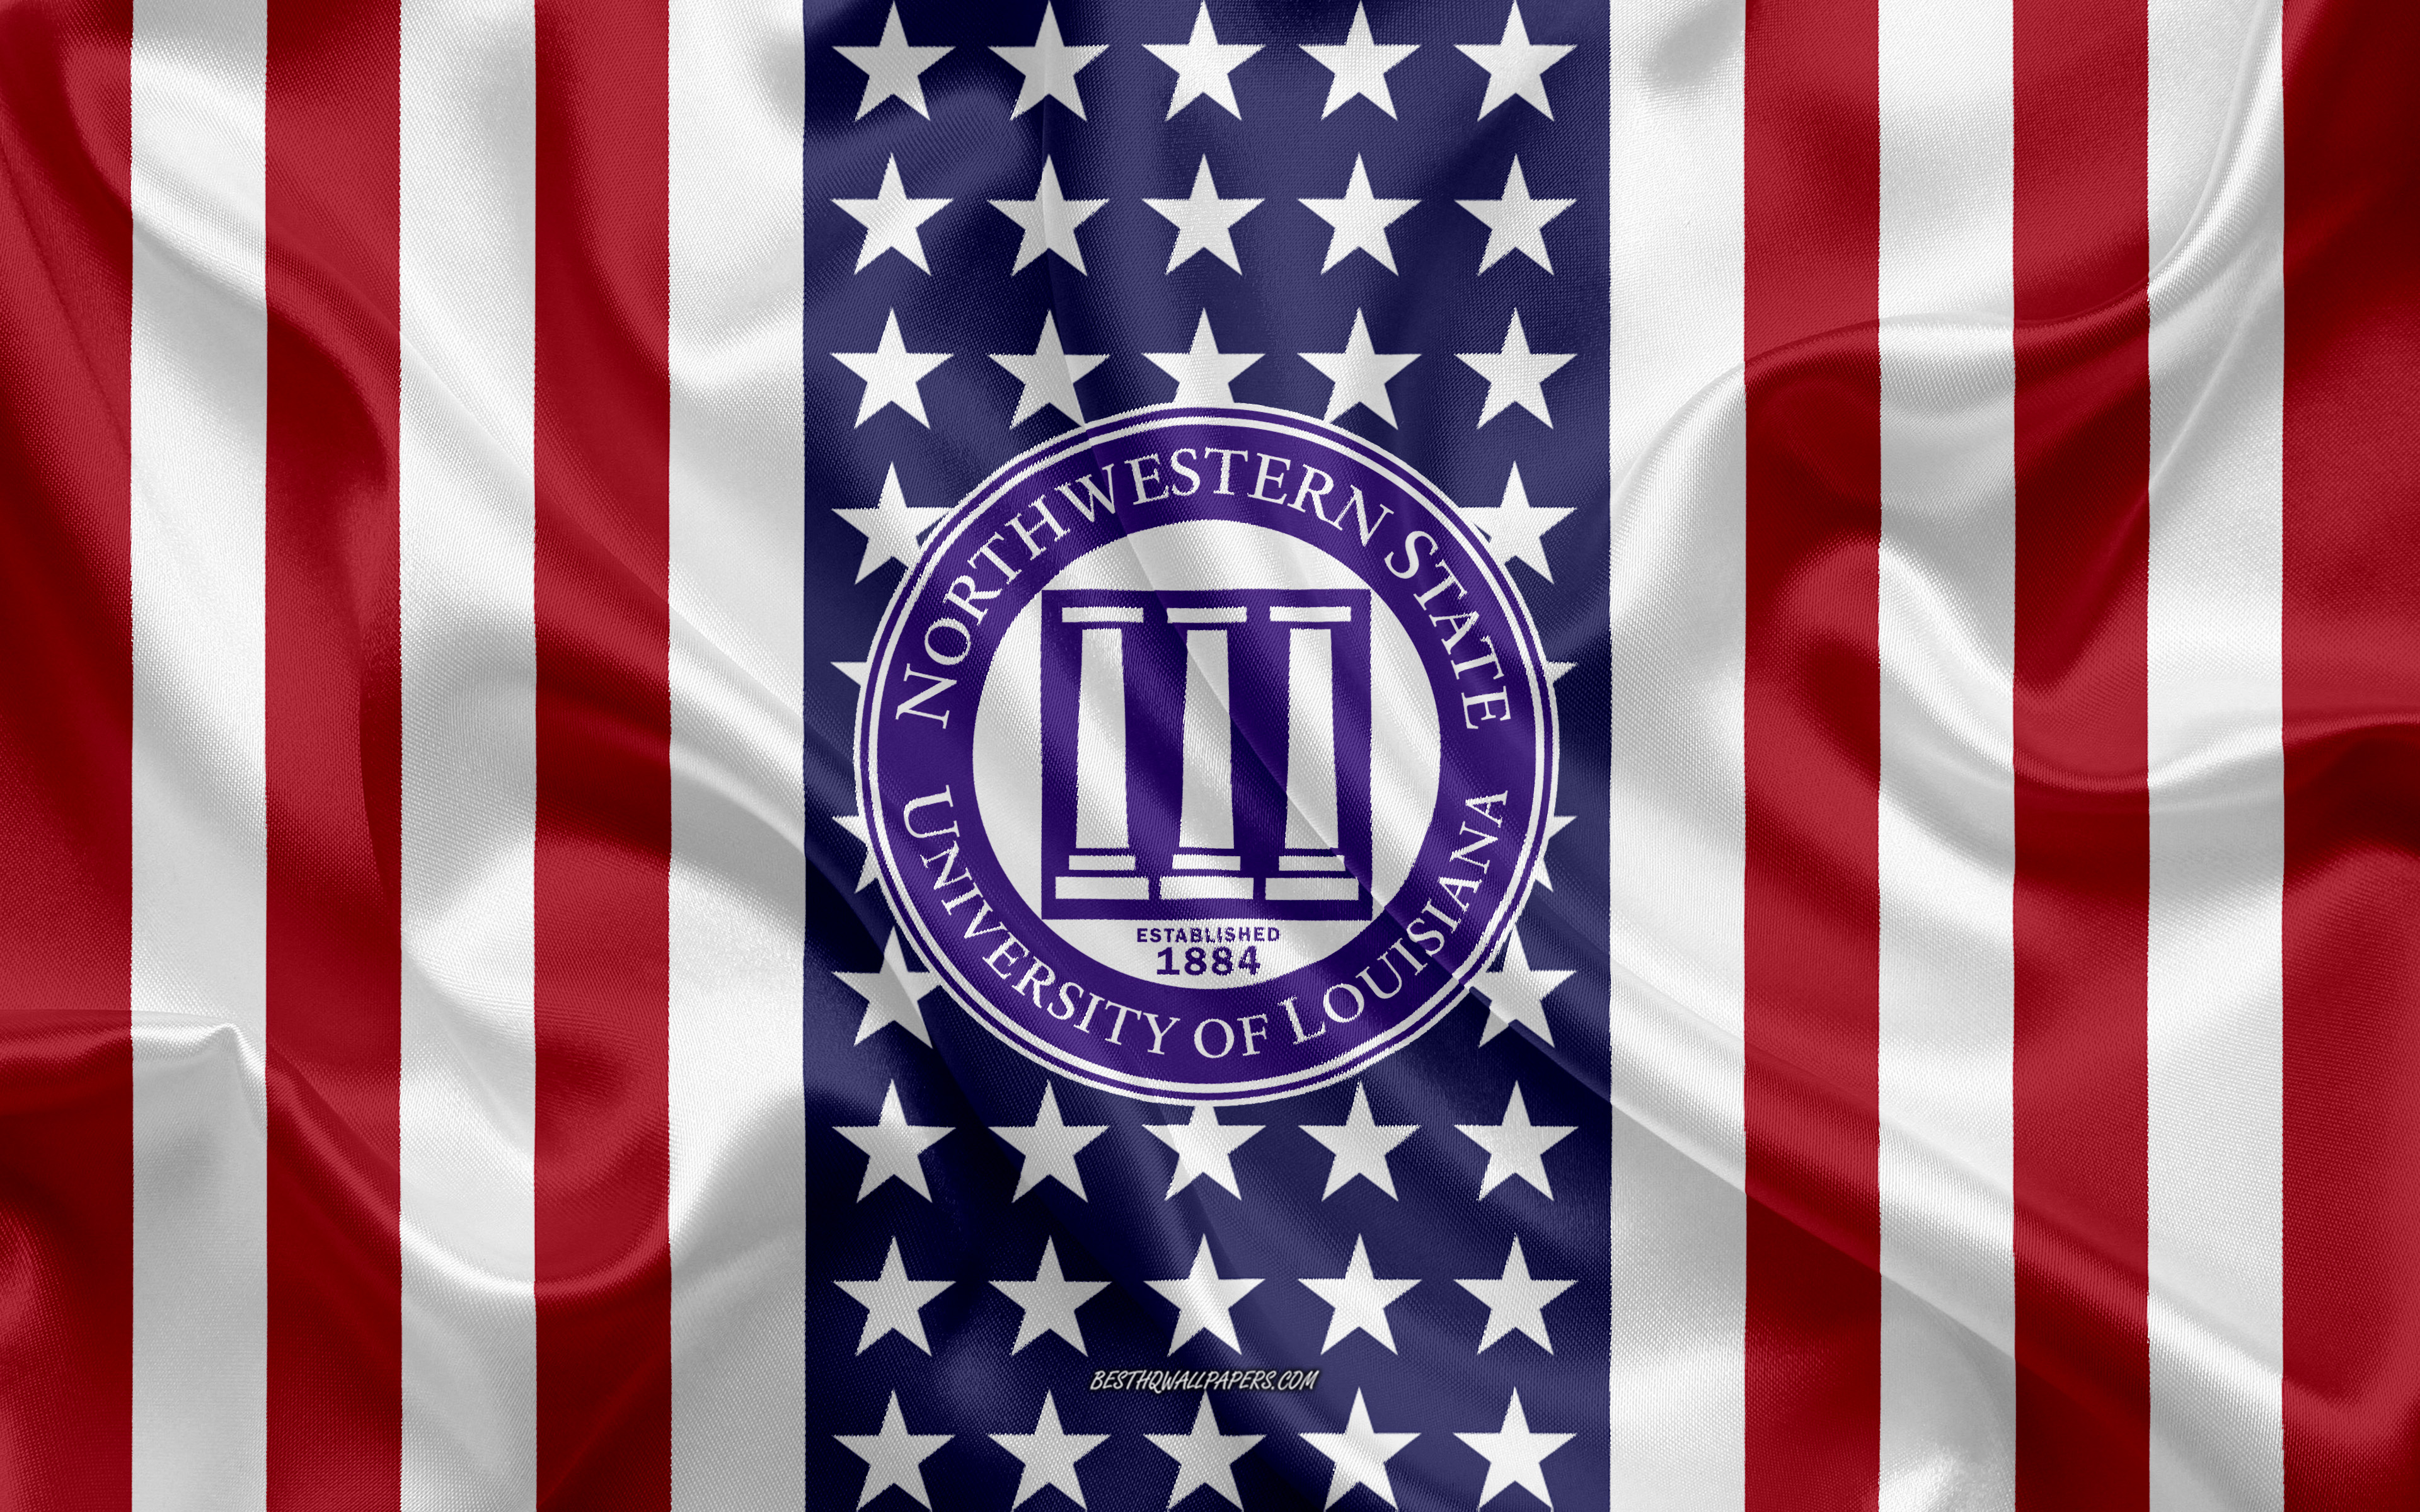 Download wallpaper Northwestern State University Emblem, American Flag, Northwestern State University logo, Natchitoches, Louisiana, USA, Northwestern State University for desktop with resolution 3840x2400. High Quality HD picture wallpaper